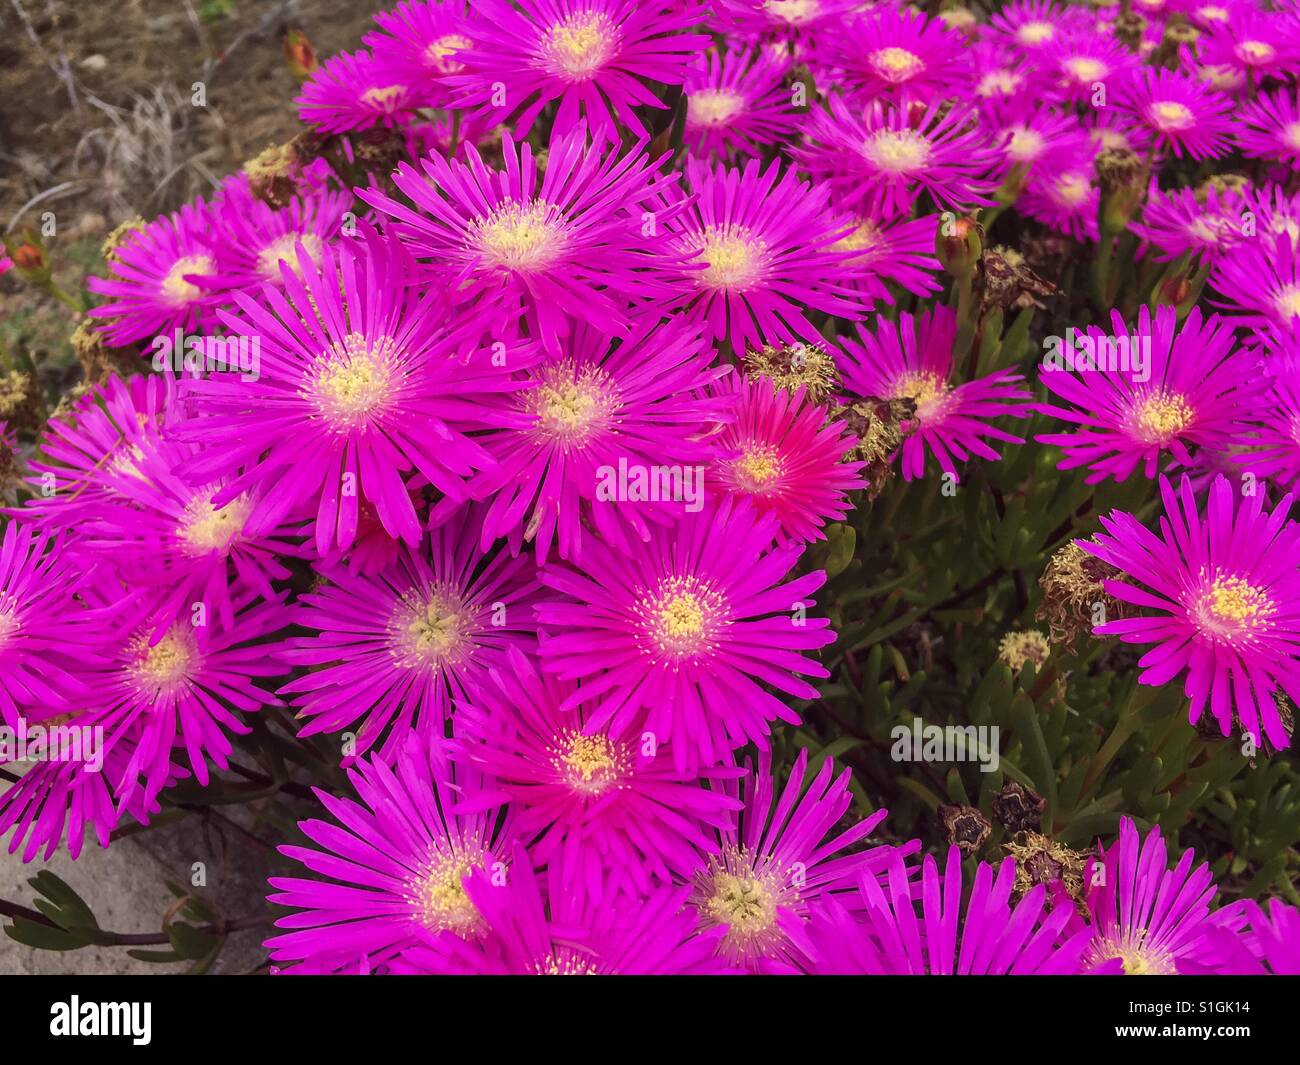 Vivid pink wild flowers in harsh arid dry environment in Portugal Stock Photo